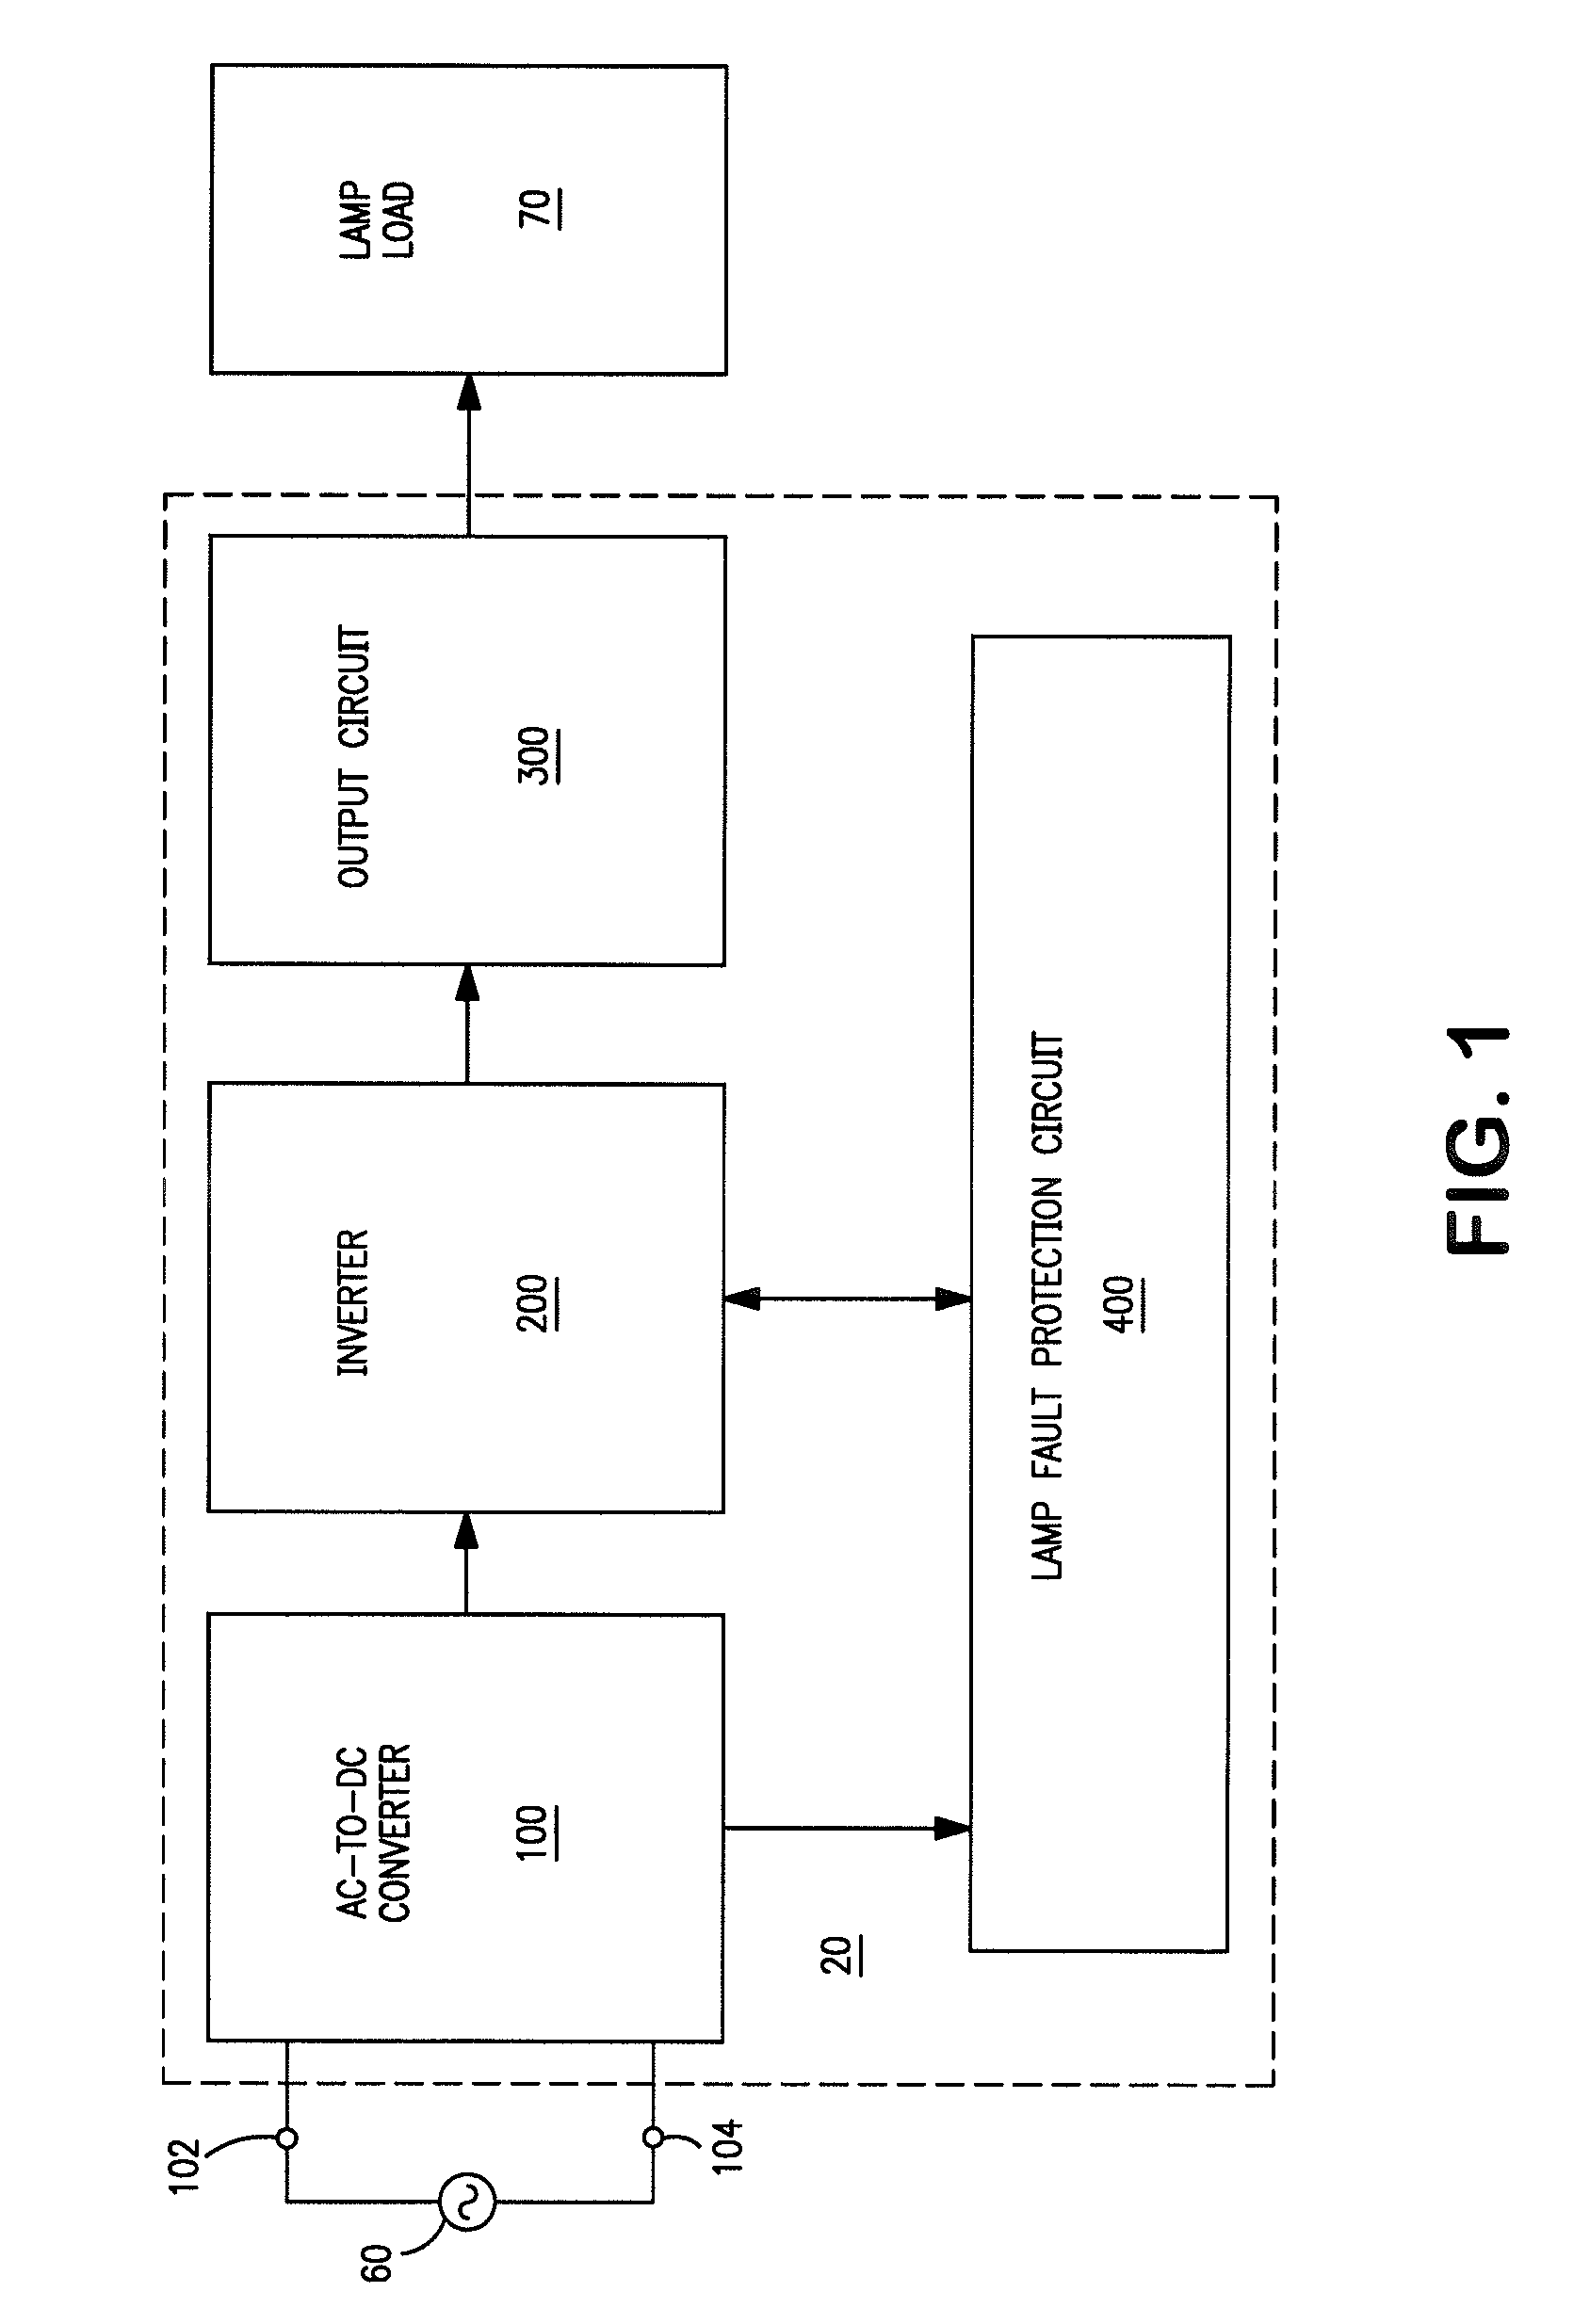 Ballast with frequency-diagnostic lamp fault protection circuit